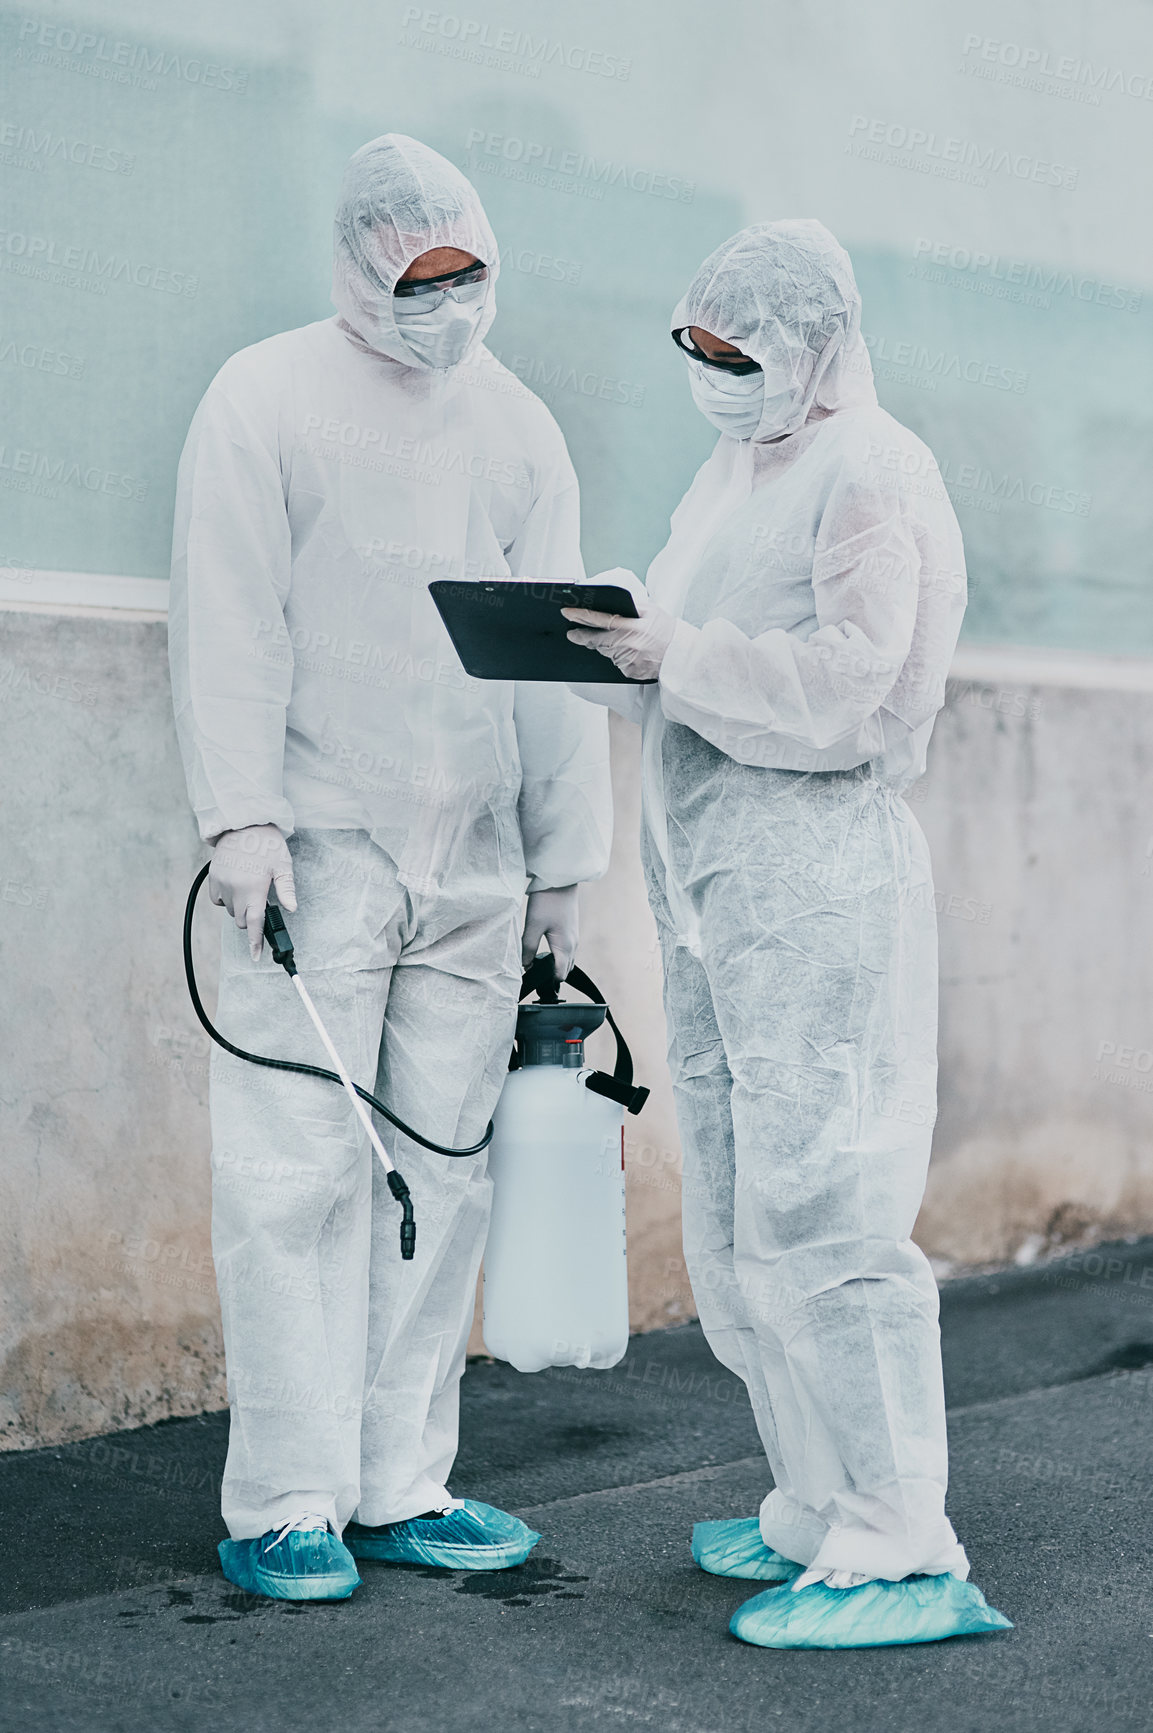 Buy stock photo Healthcare workers cleaning outside a building using a list to follow instructions on biohazard safety during covid. Medical researchers wearing hazmat suits sanitizing outdoor to prevent infections